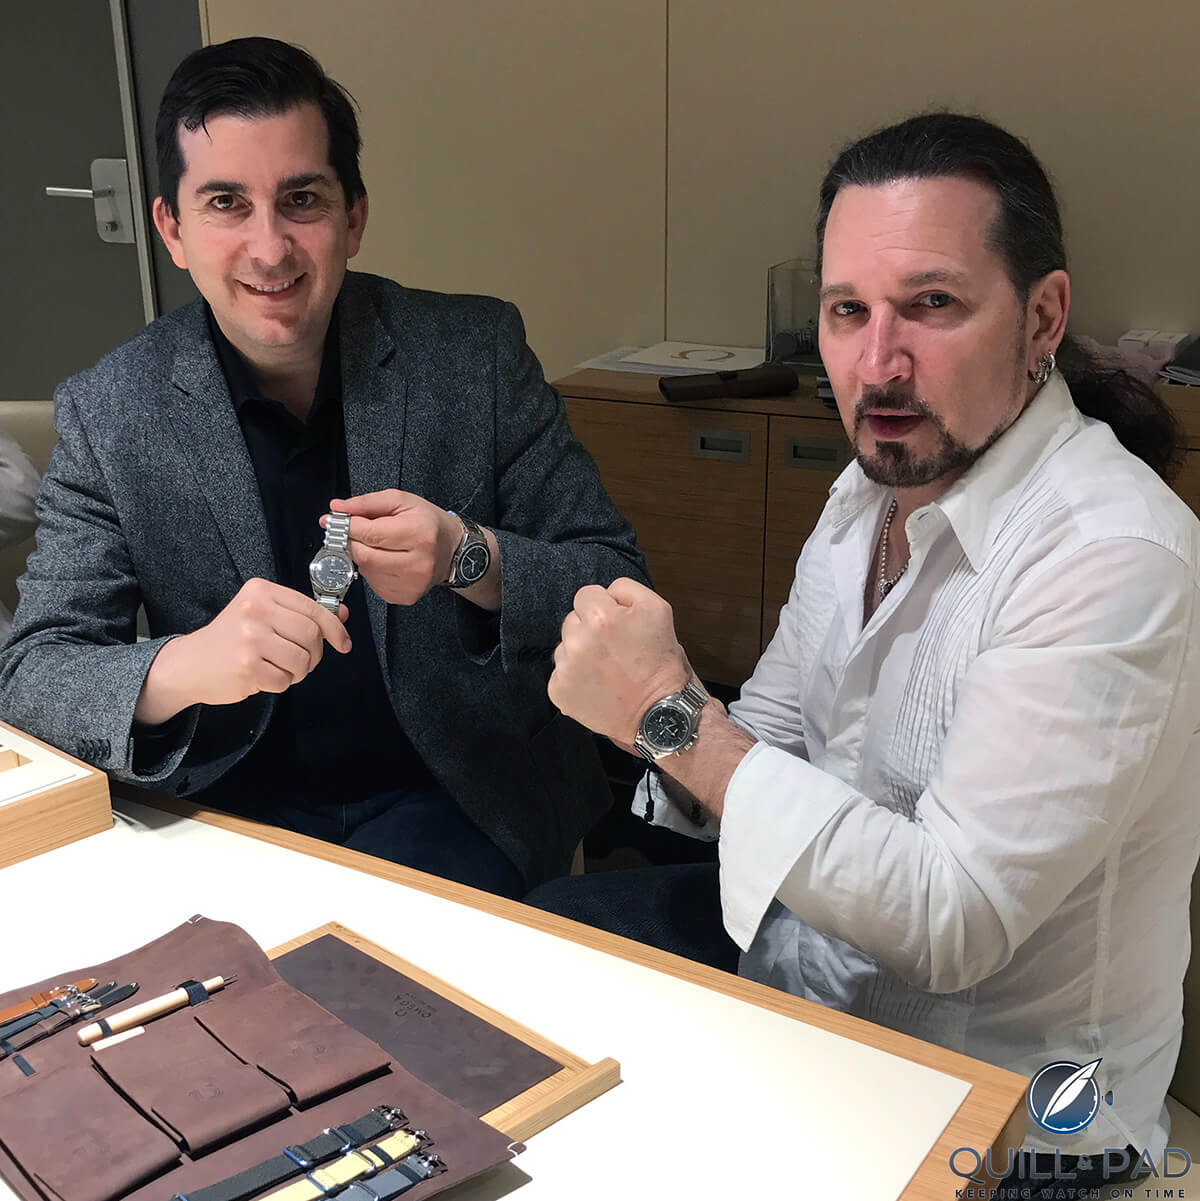 Kiss drummer Eric Singer (right) with Tob Caplan of Topper checking out watches at the Omega booth at Baselworld 2017 (photo courtesy Rob Caplan)